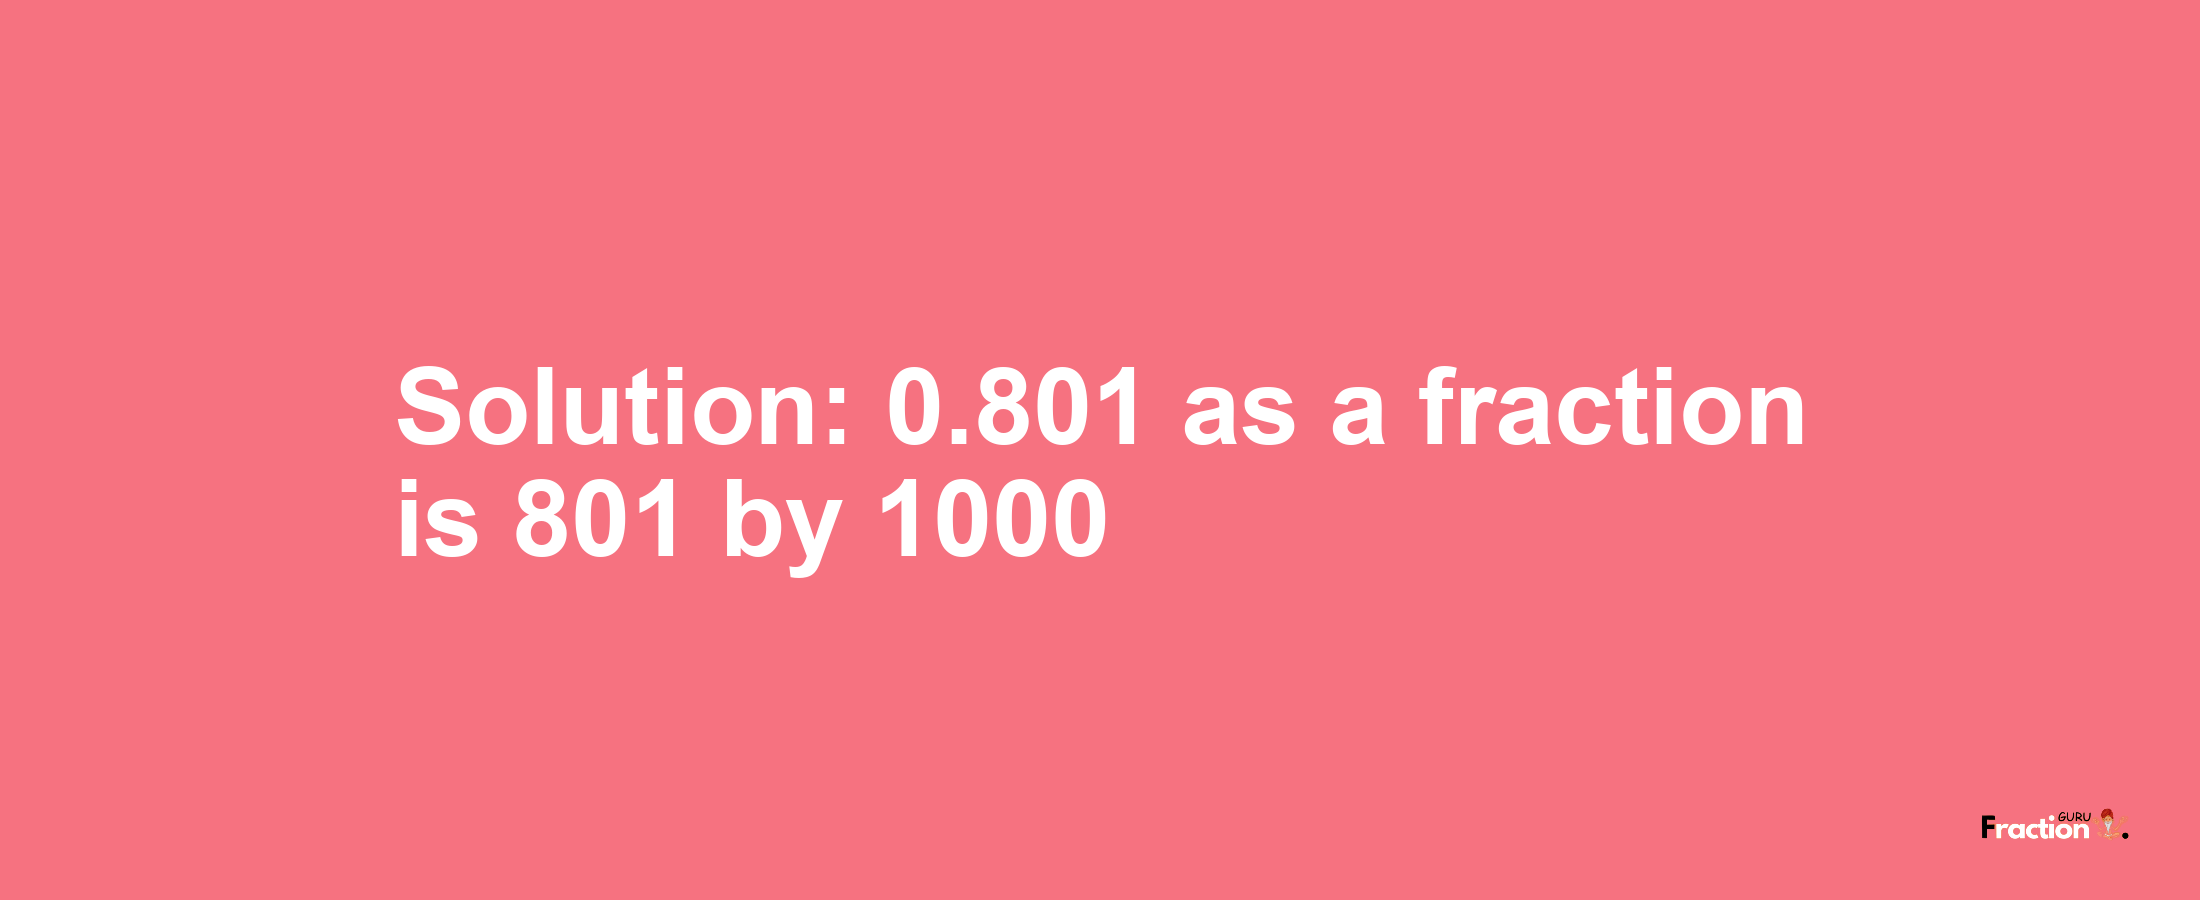 Solution:0.801 as a fraction is 801/1000